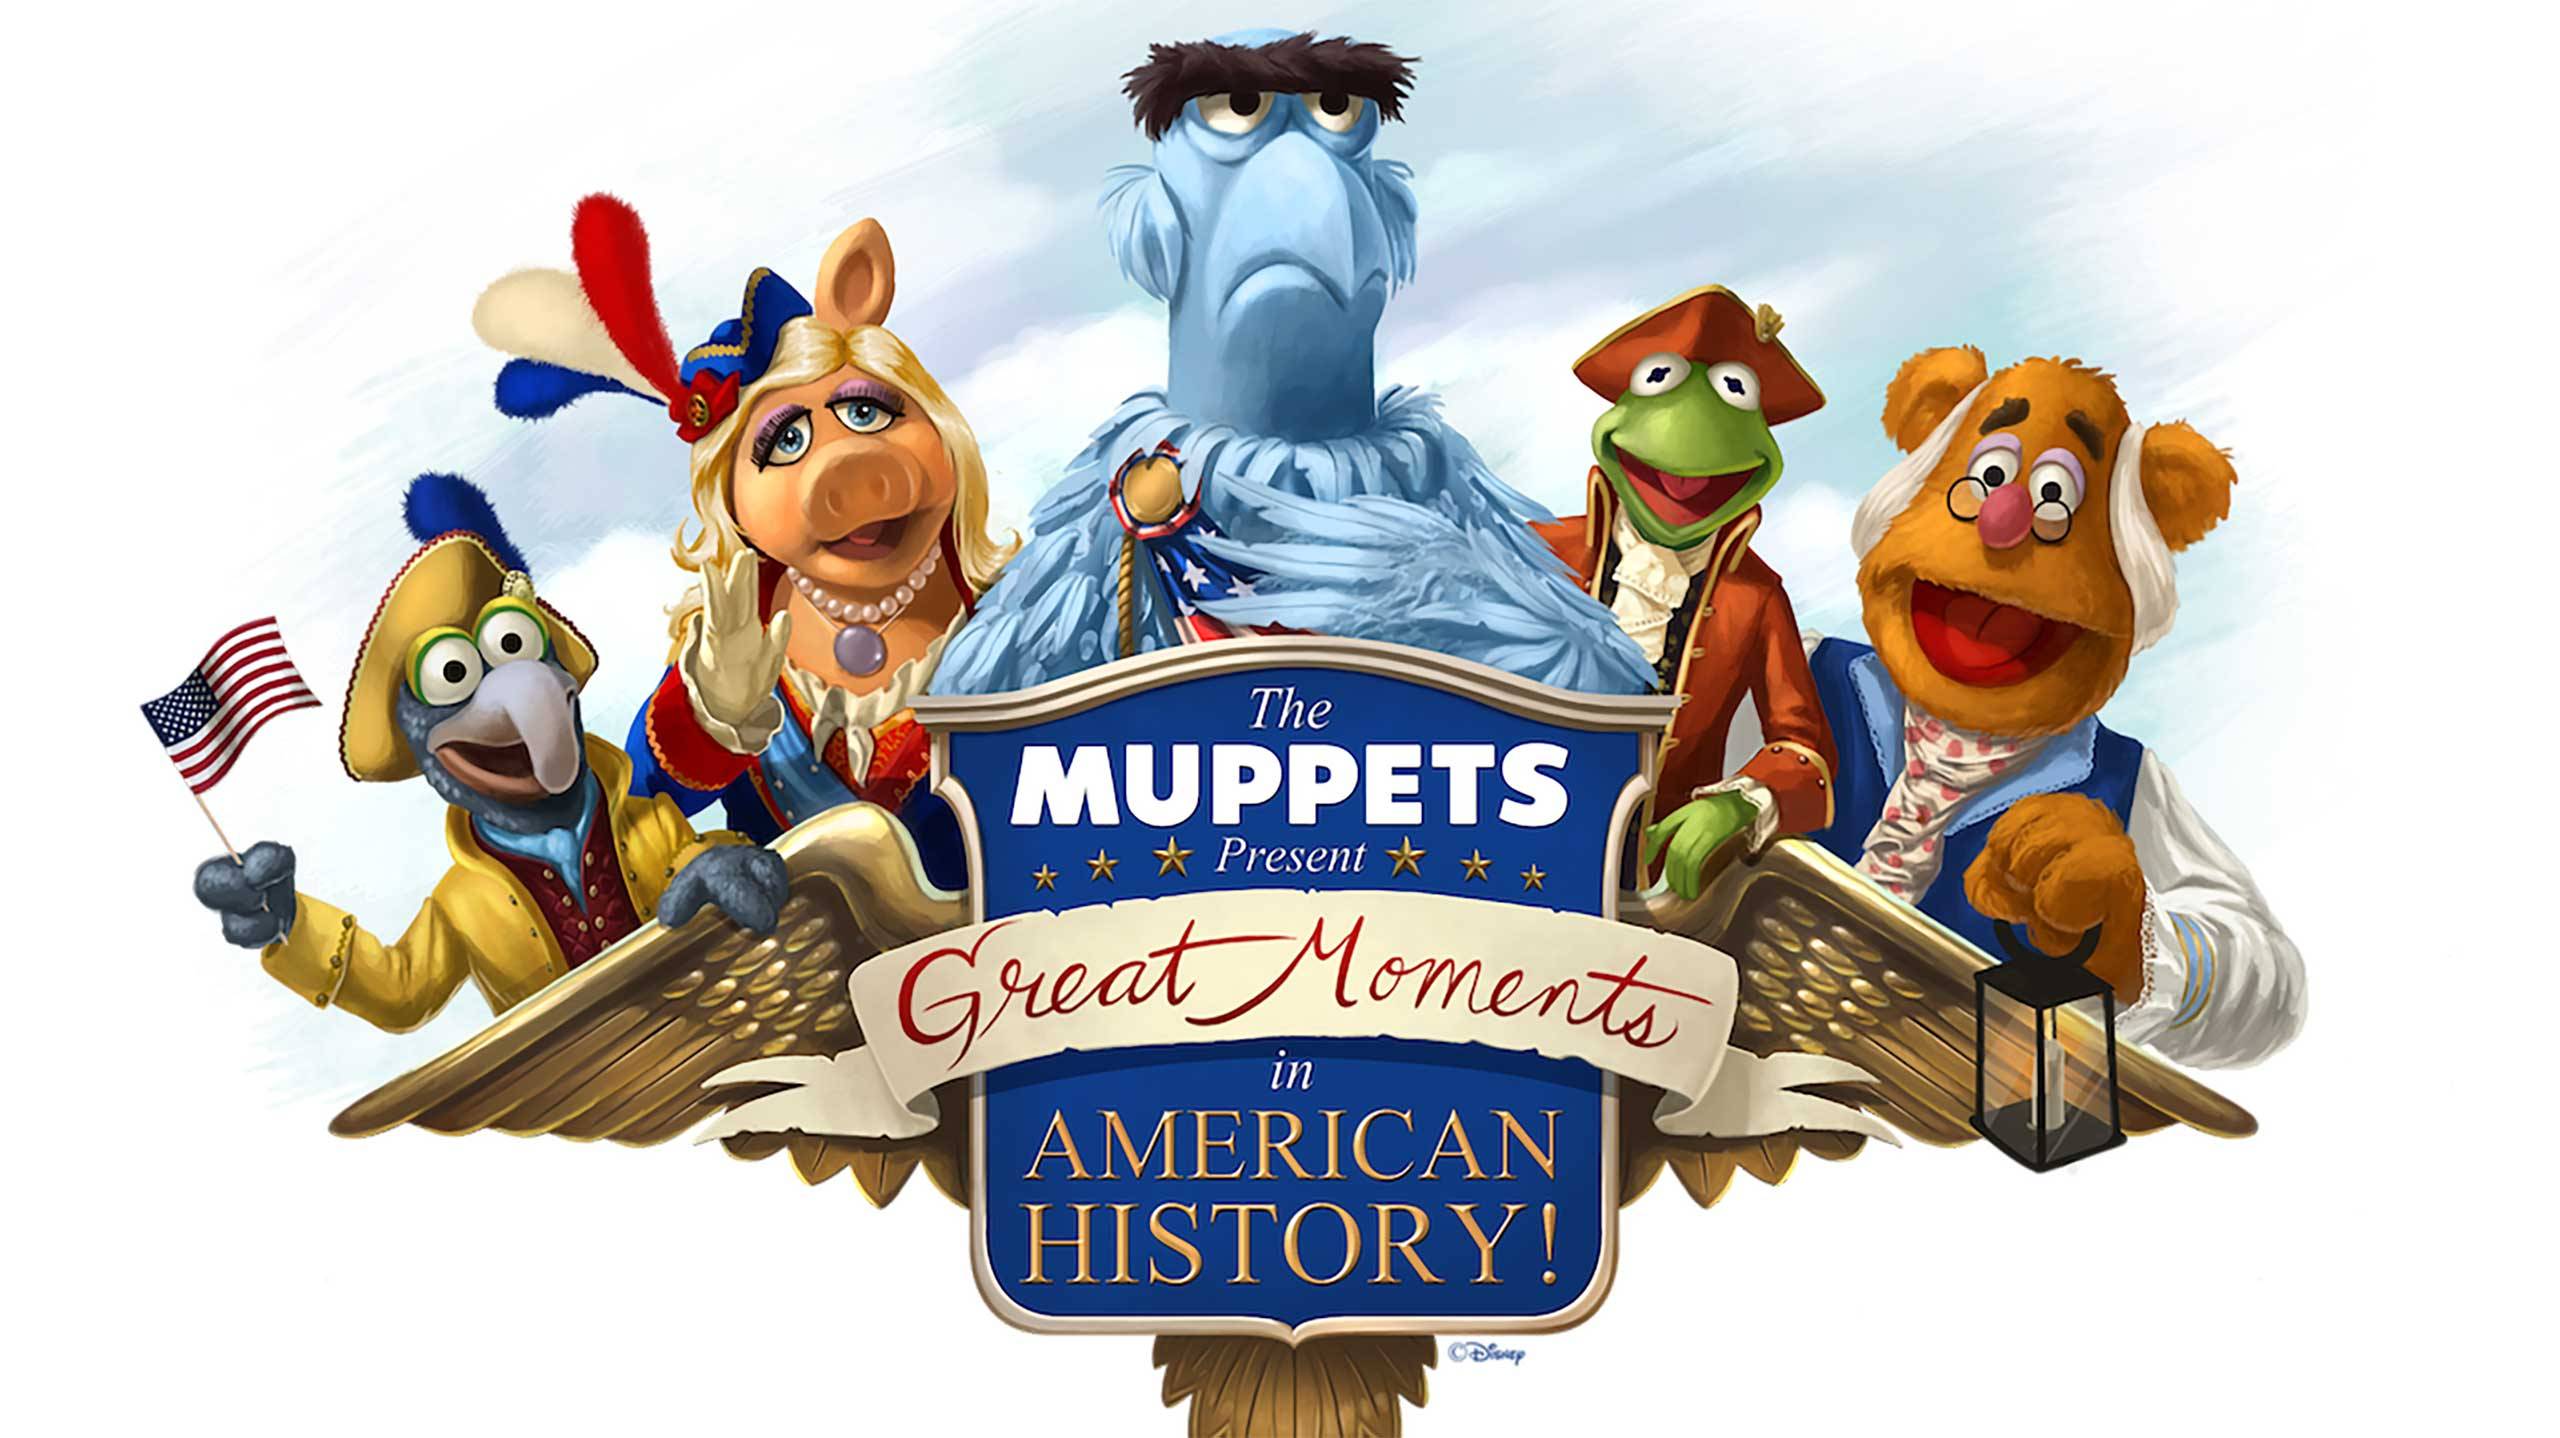 The Muppets Present… Great Moments in American History